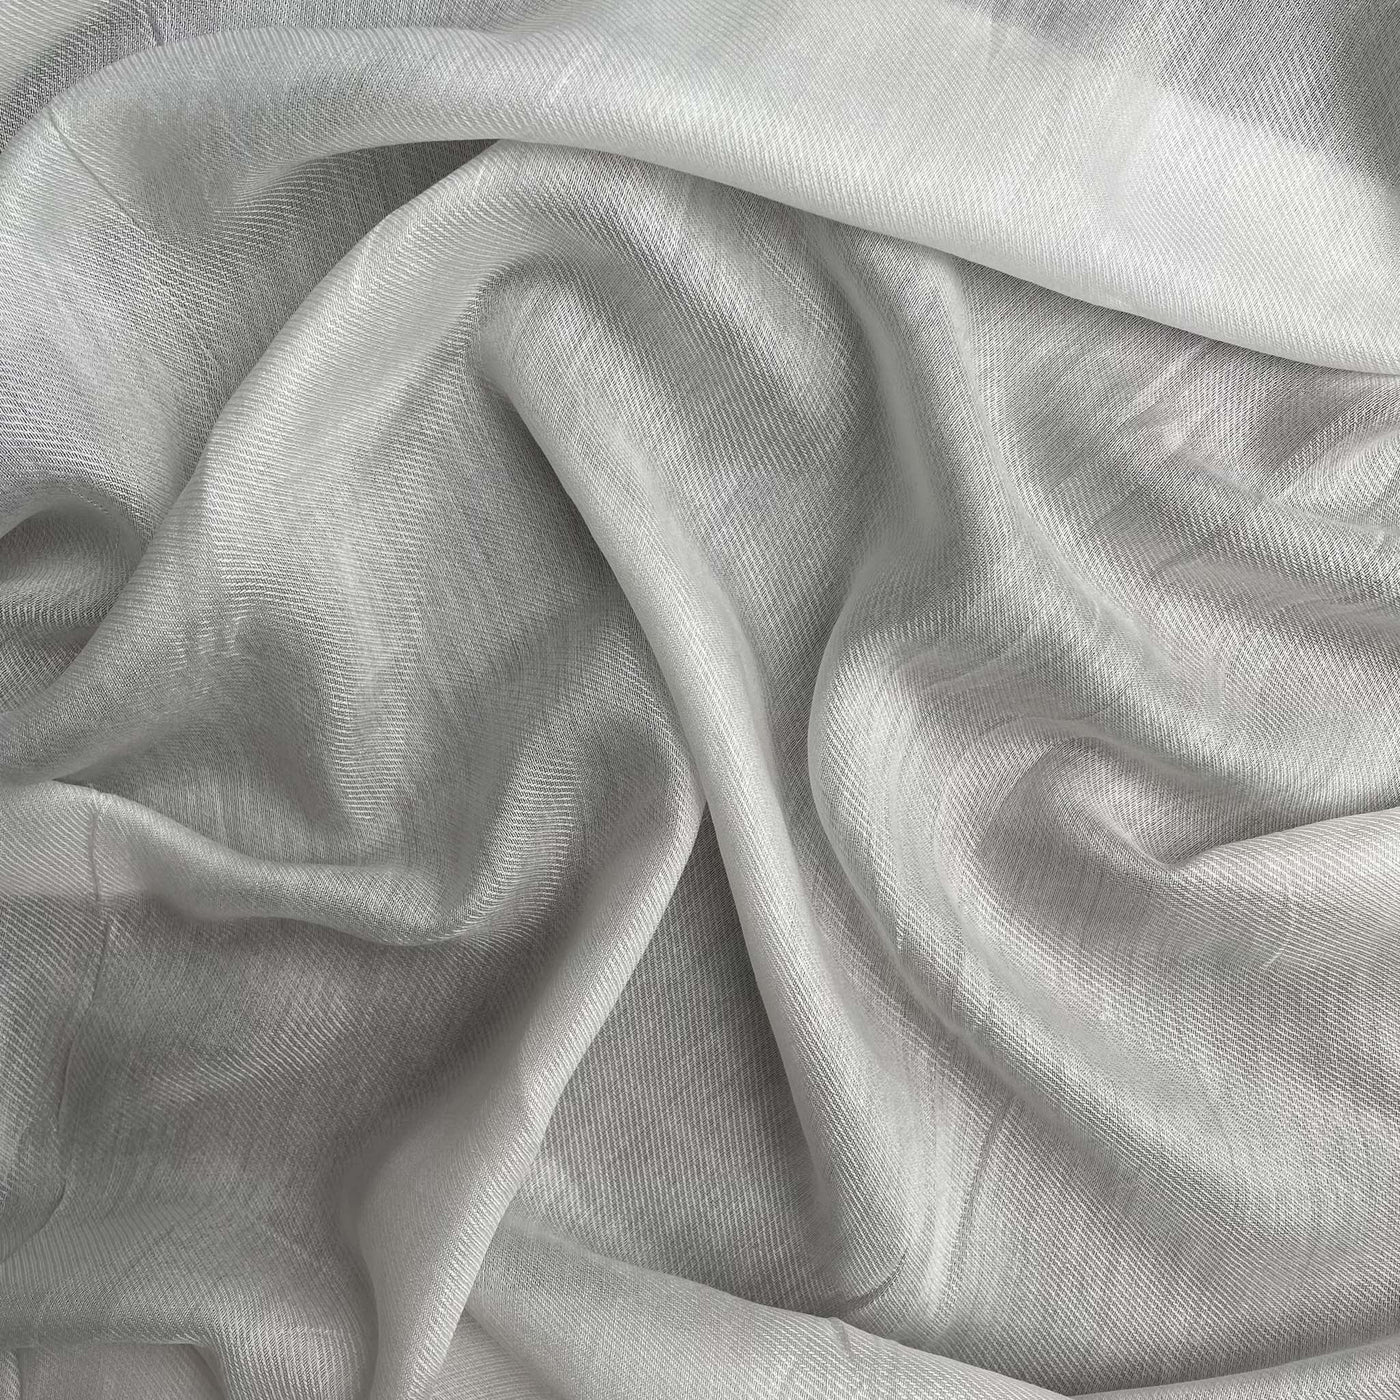 Fabric Pandit Fabric White Dyeable Pure Bemberg Heavy Pashmina Plain Fabric (Width 44 Inches, 88 Gms)